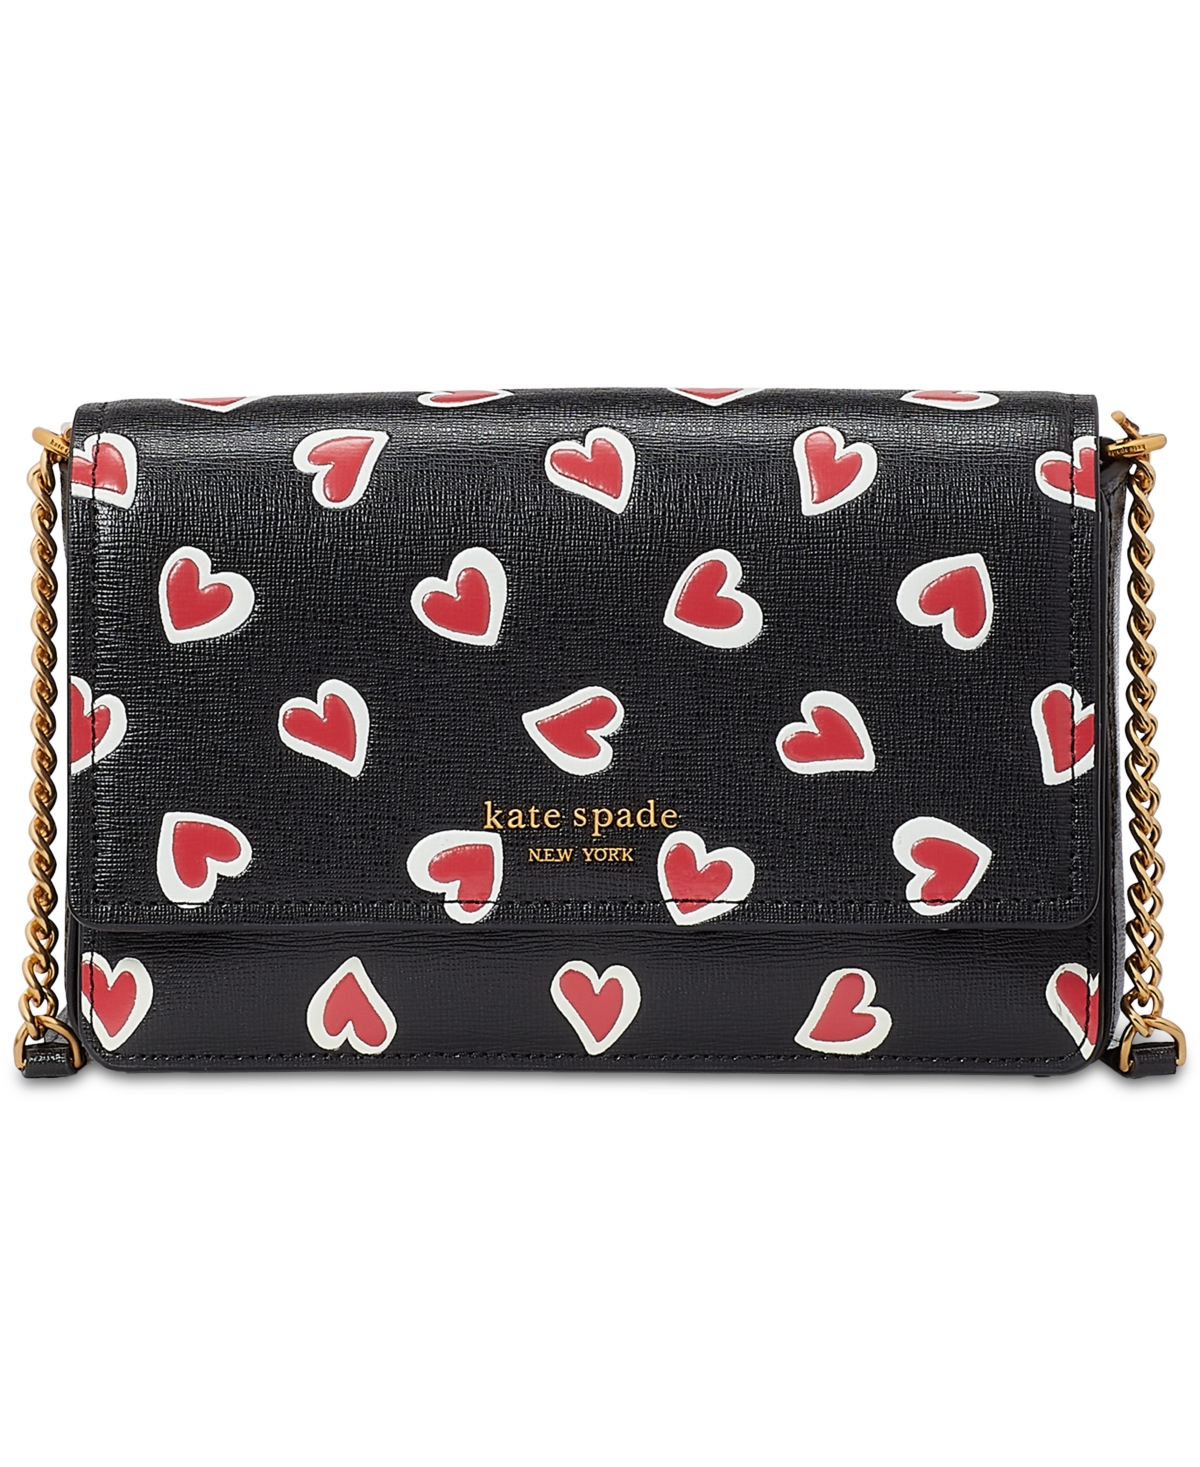 KATE SPADE MORGAN STENCIL HEARTS EMBOSSED PRINTED SAFFIANO LEATHER FLAP CHAIN WALLET